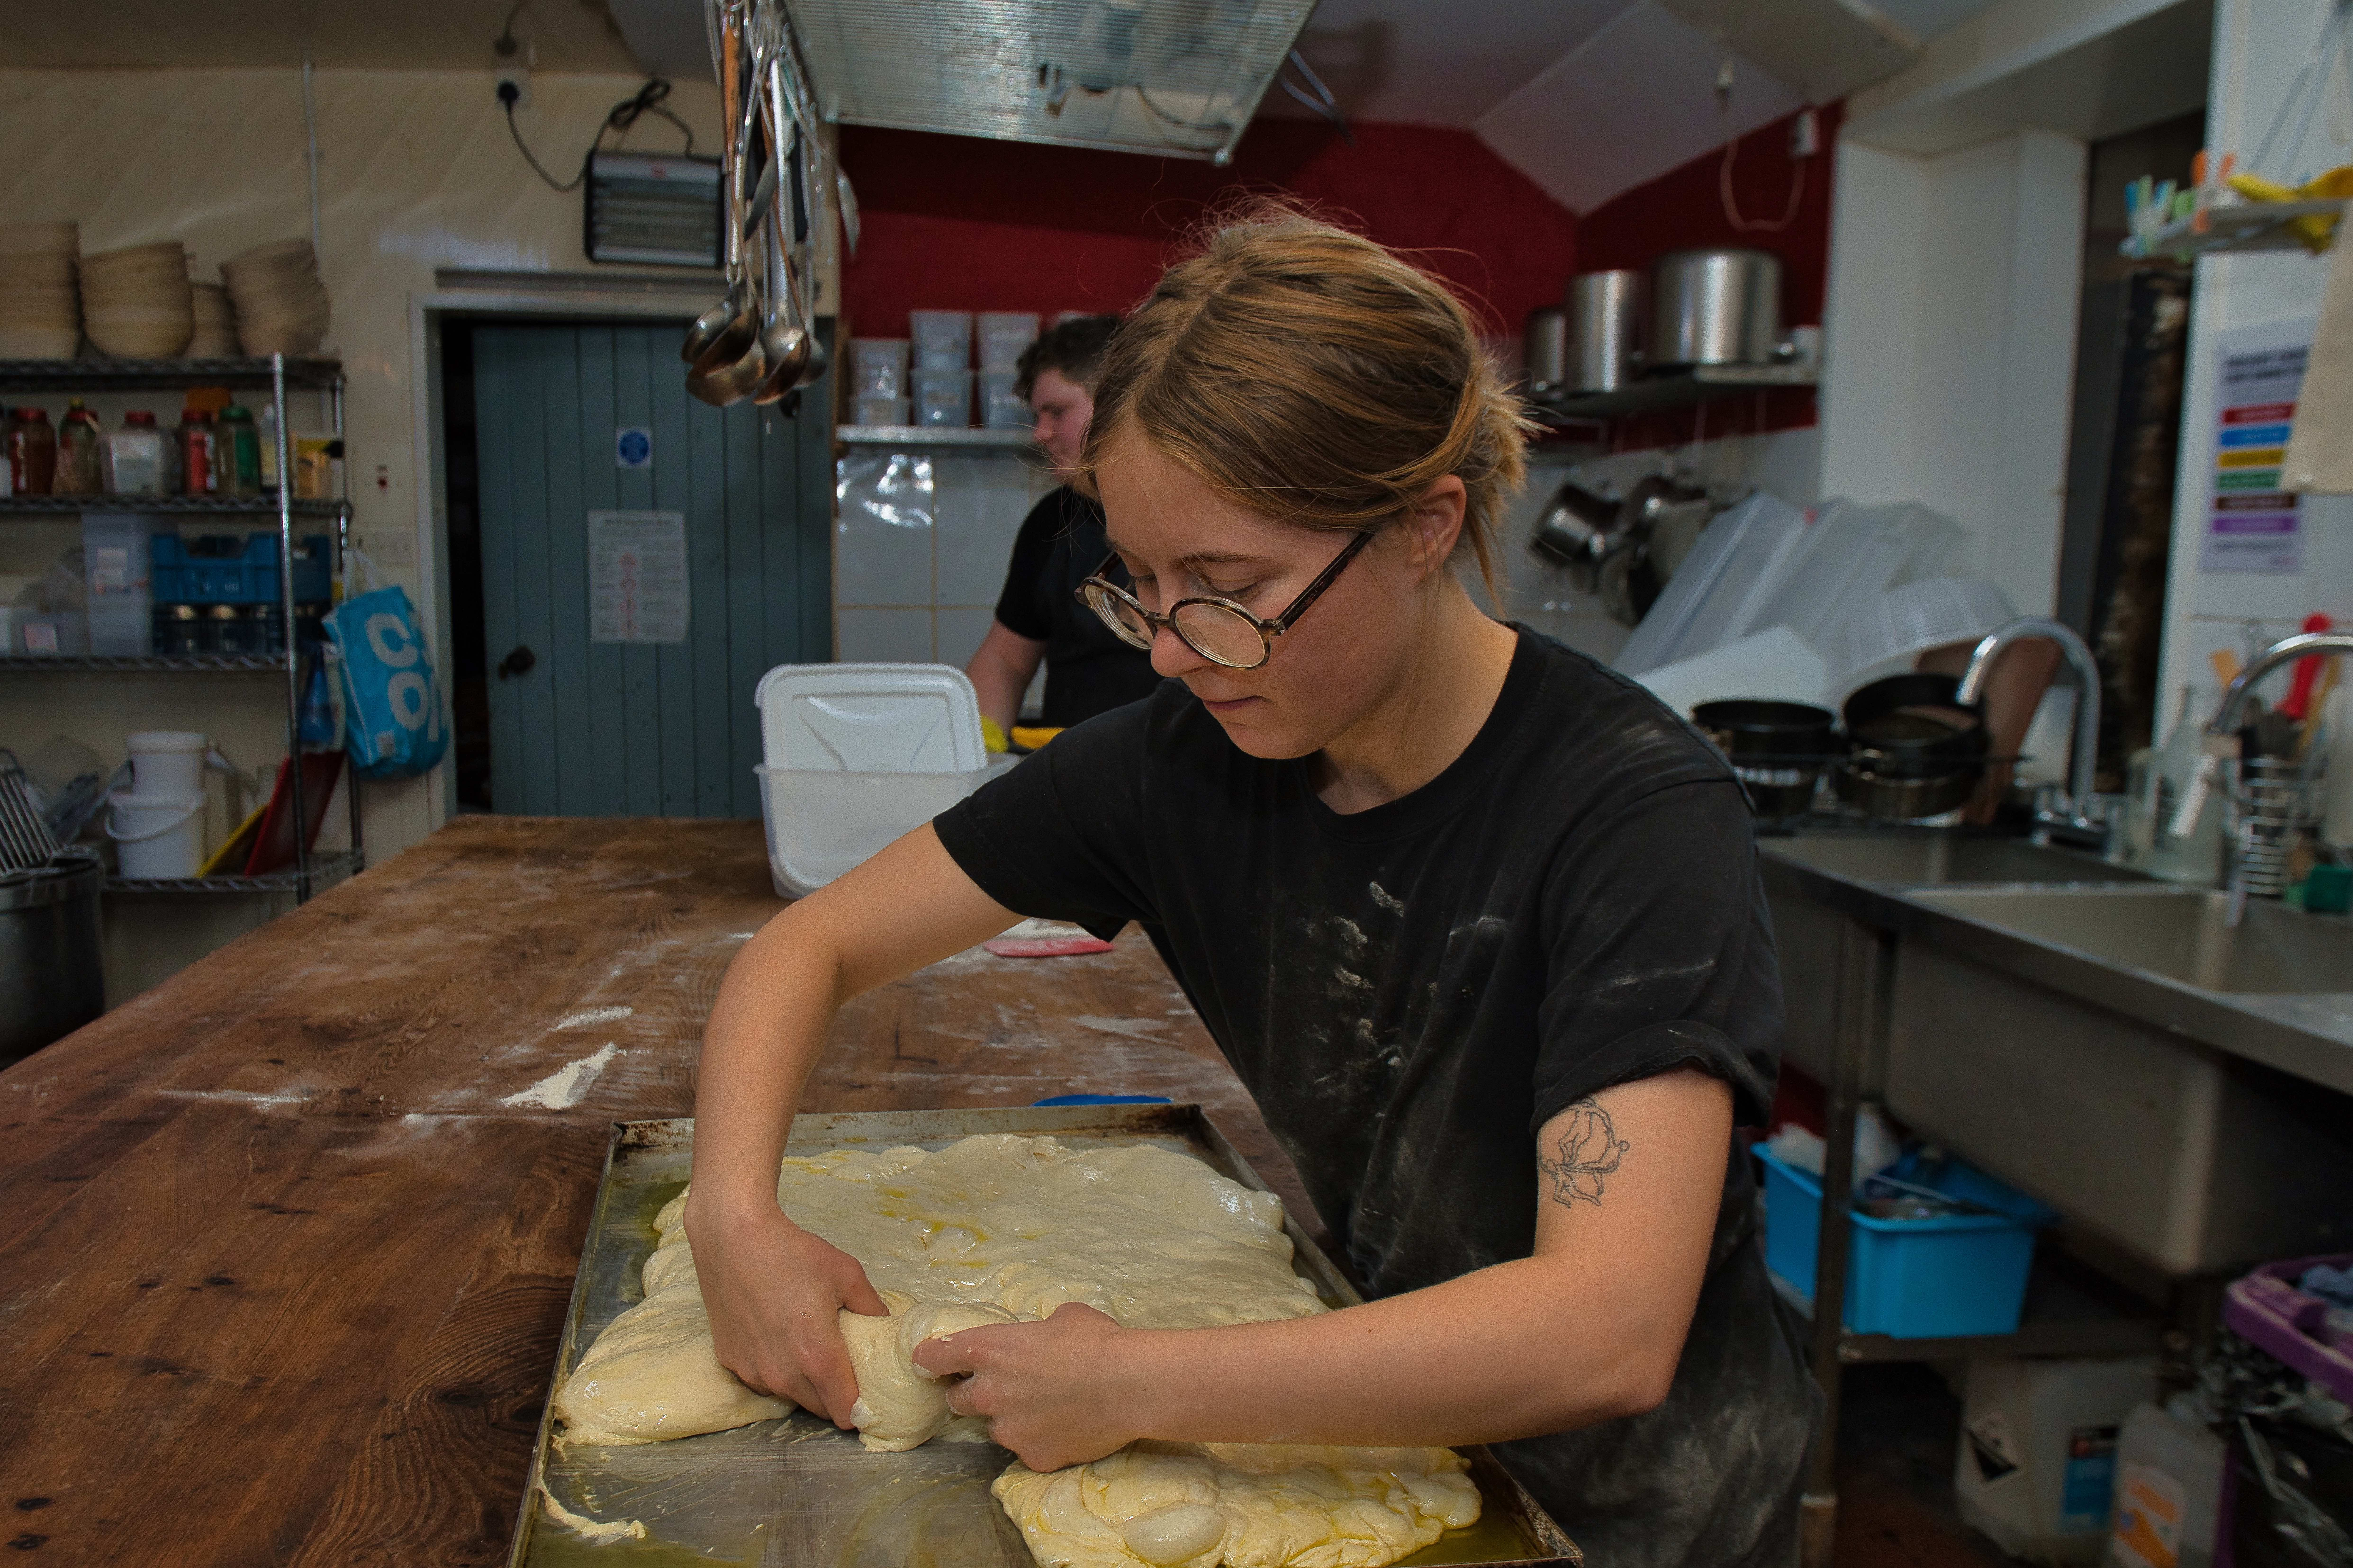 A member of the Propagate collective preparing freshly baked produce